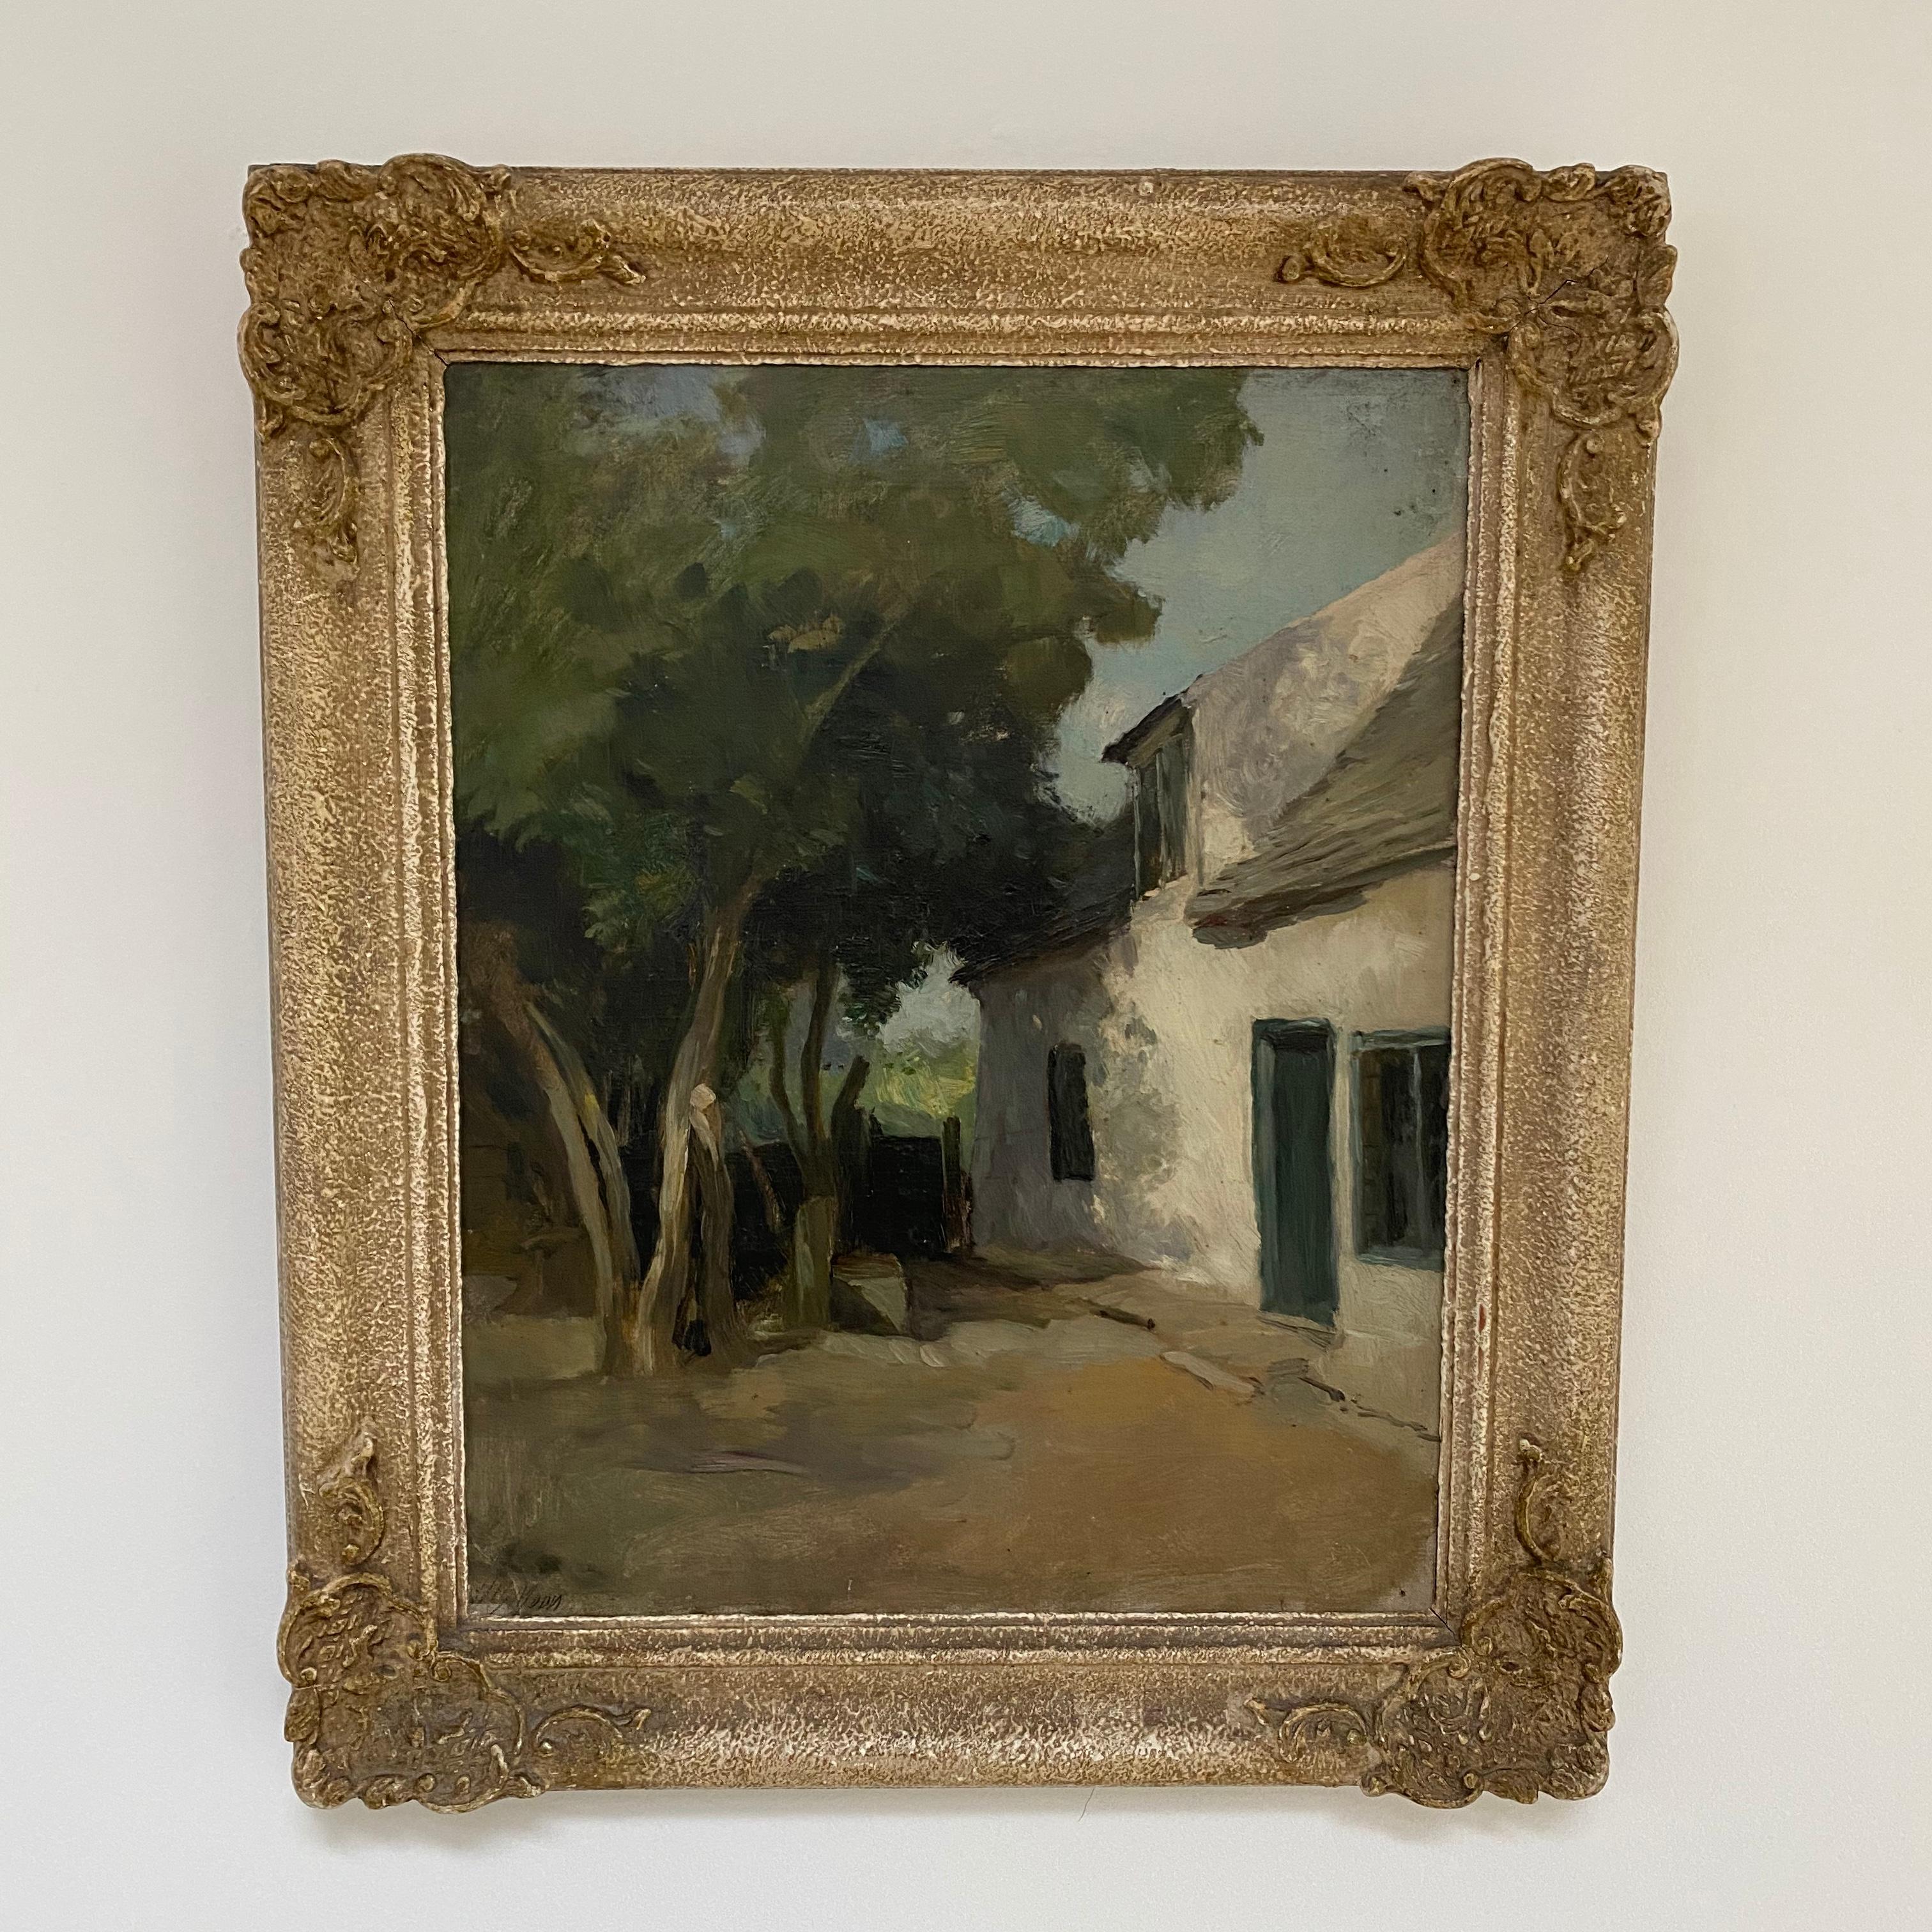 A really lovely painting by one of the country’s greatest Botanical artists Henry George Moon. The crumbly old white washed cottage walls with the dappled sun drawing the viewers’ attention to the door, sloping roof and upper window. The shadow cast